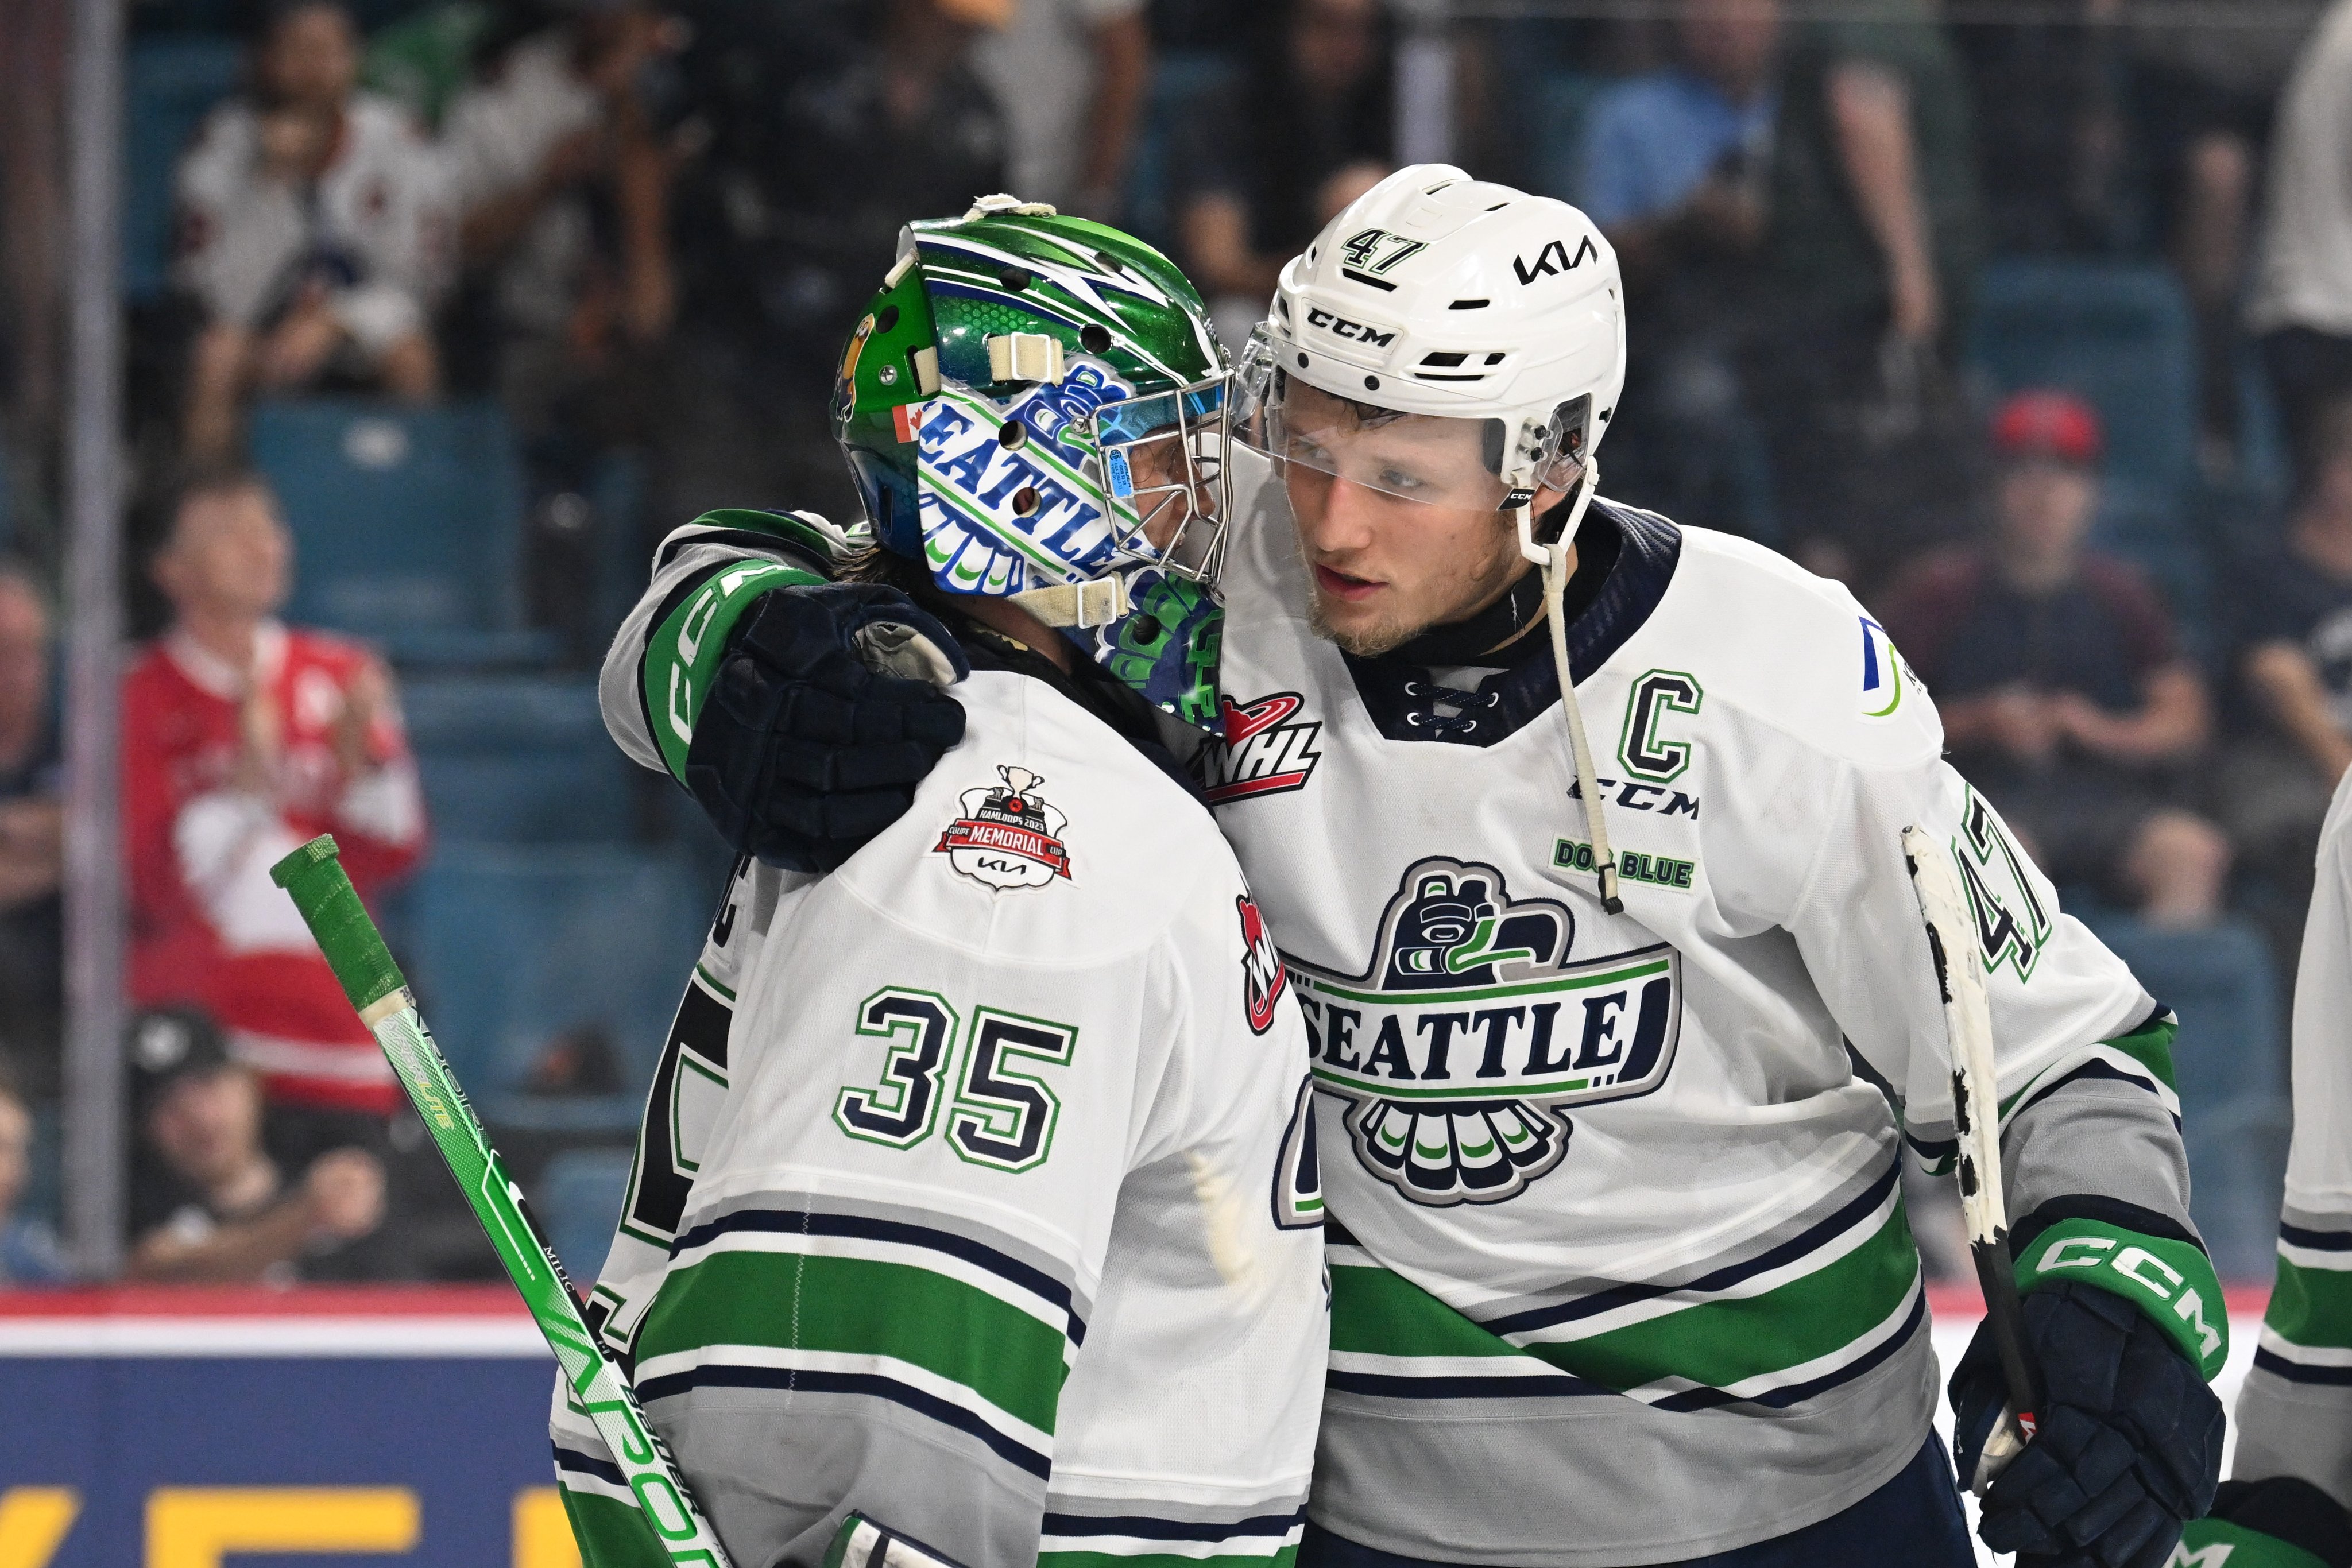 Seattle Thunderbirds - Cool Bird poses with a young fan.